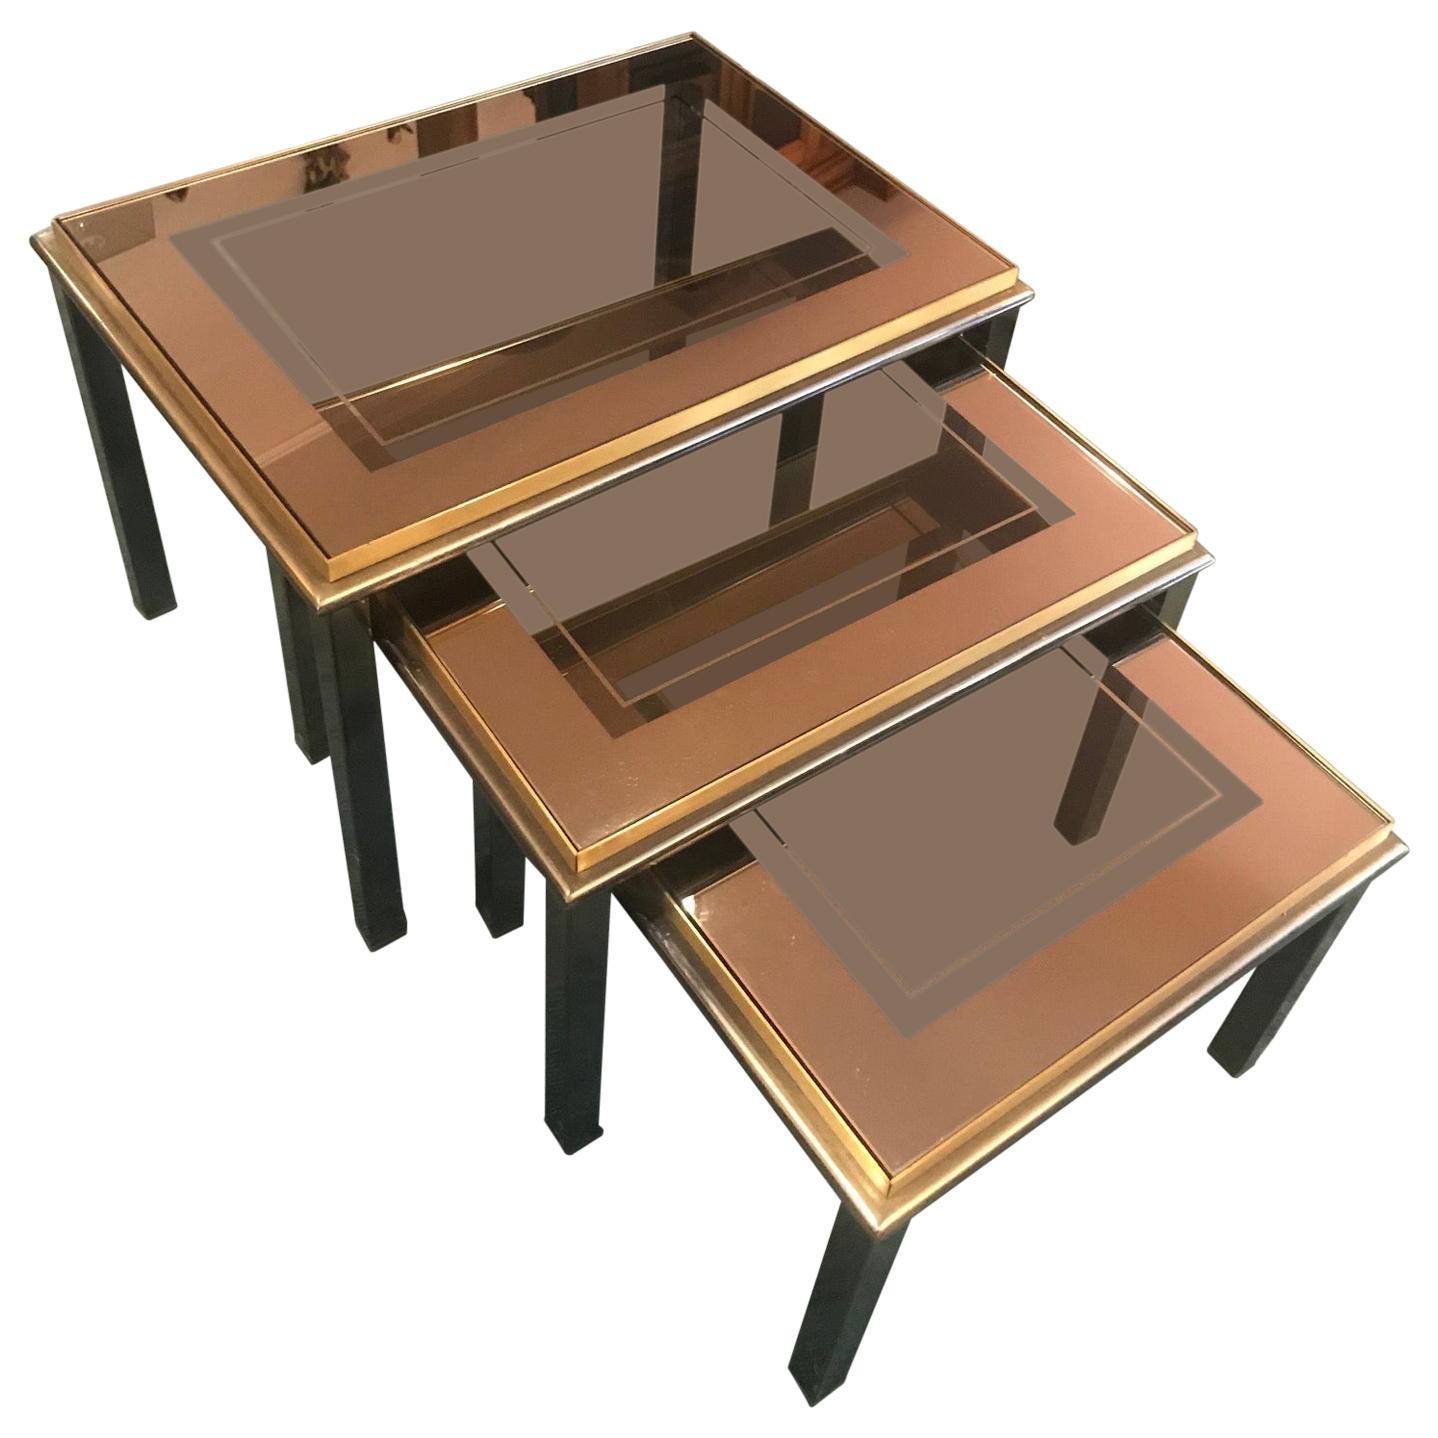 20th Century French Glass and Brass Nesting Tables, 1950s